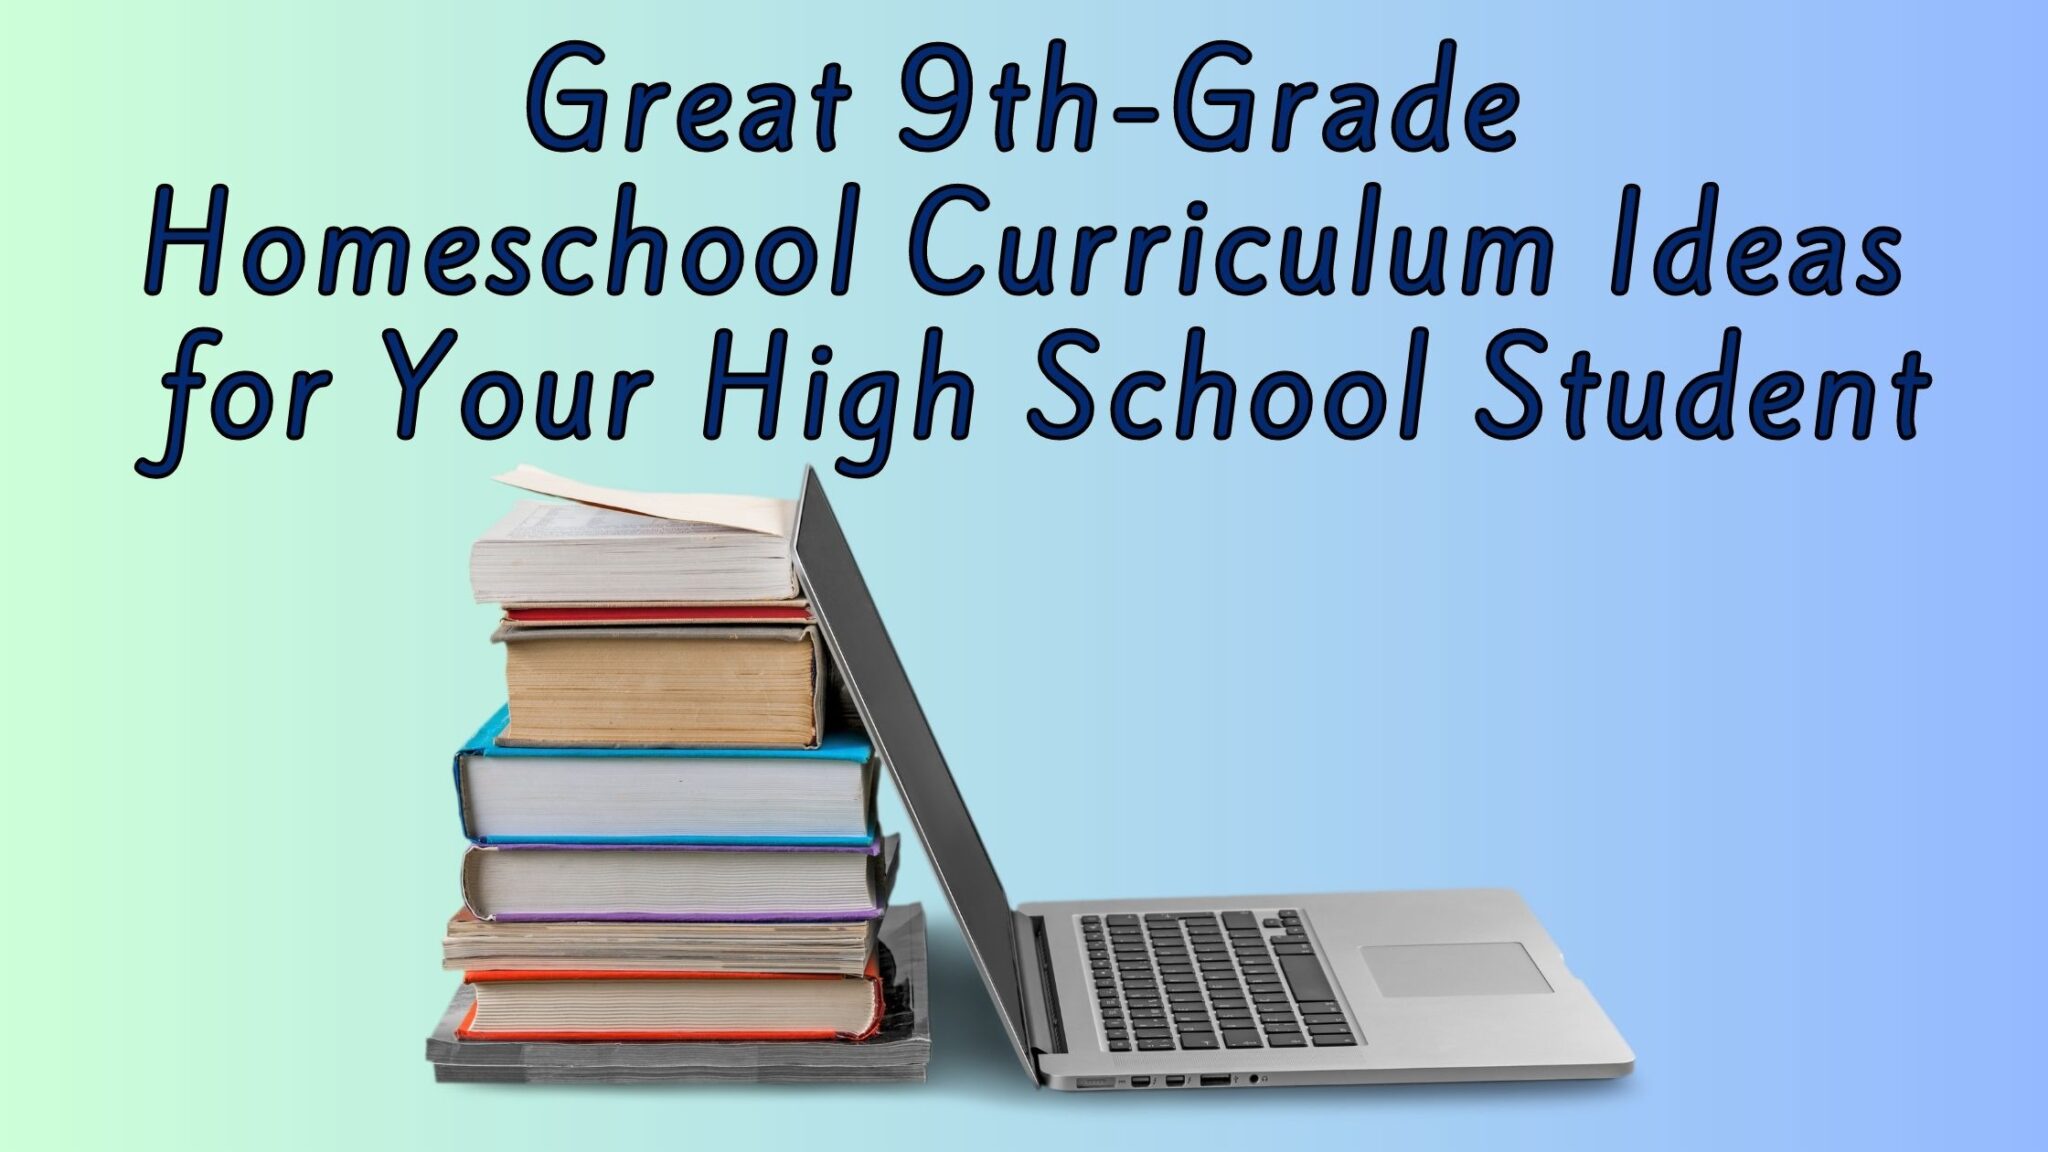 Great 9th-Grade Homeschool Curriculum Ideas for Your High School Student -  The Secret Life of Homeschoolers